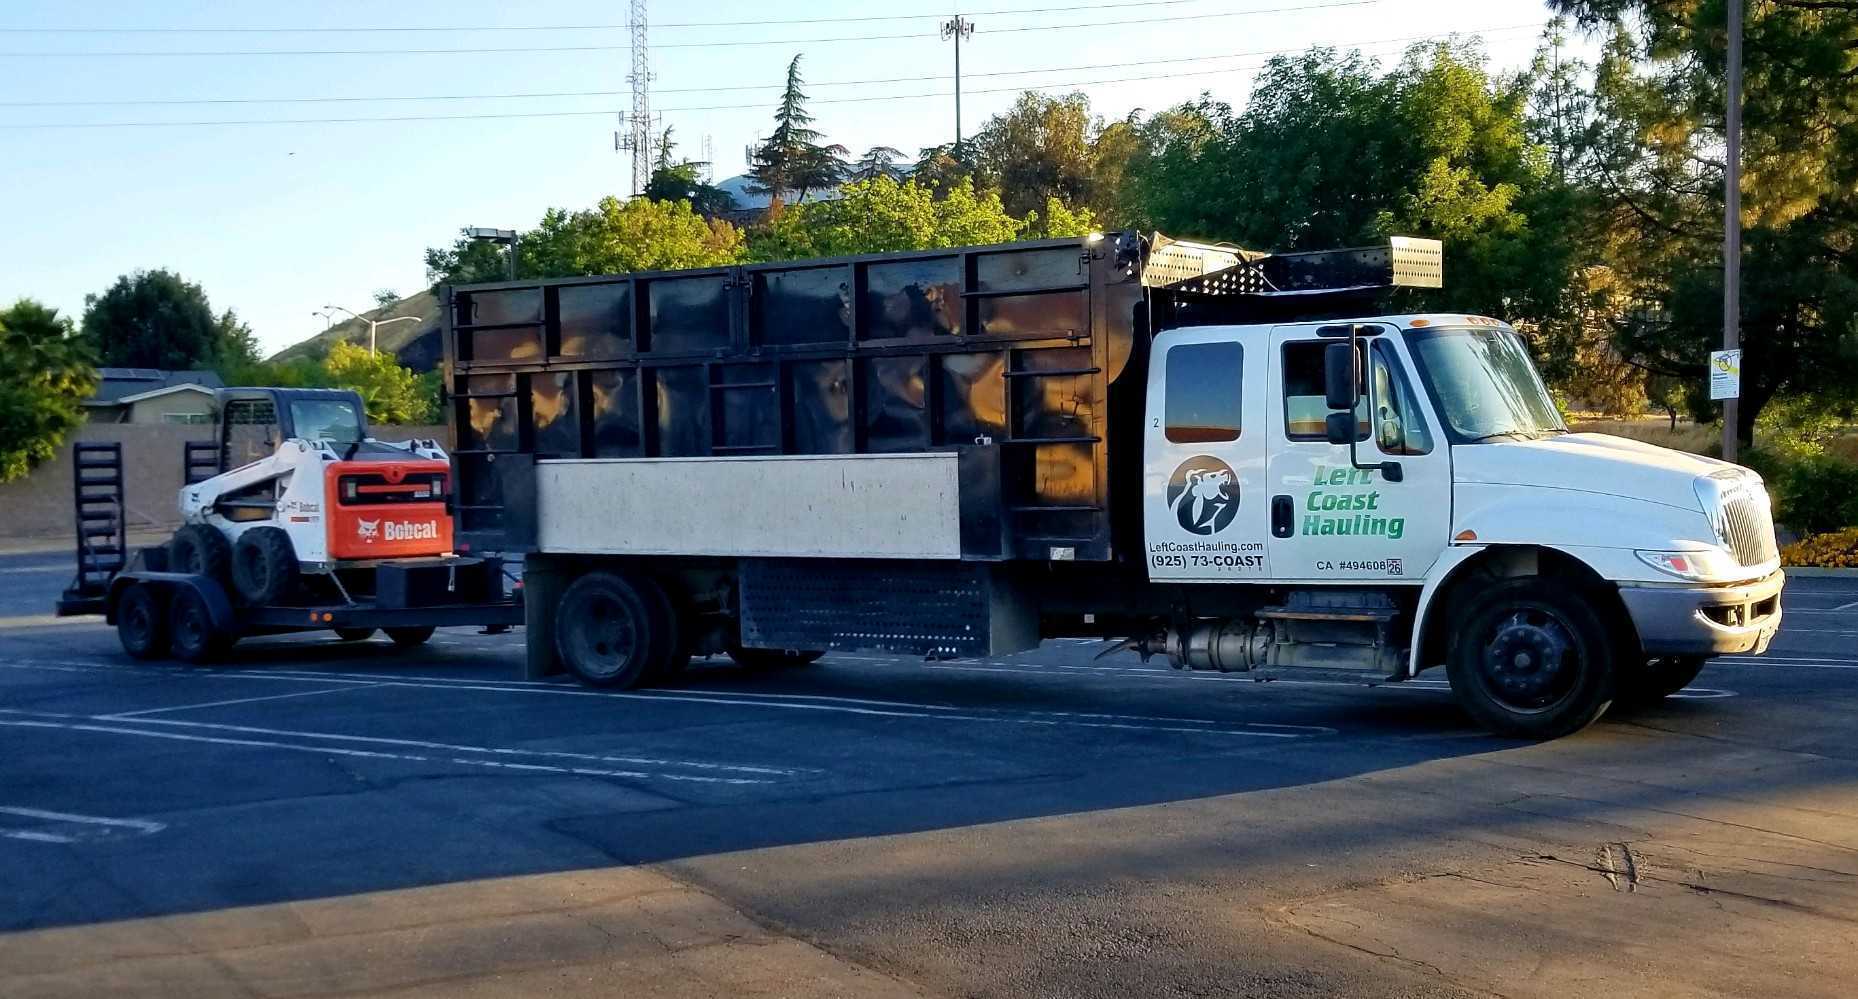 Junk Removal Services by Left Coast Hauling